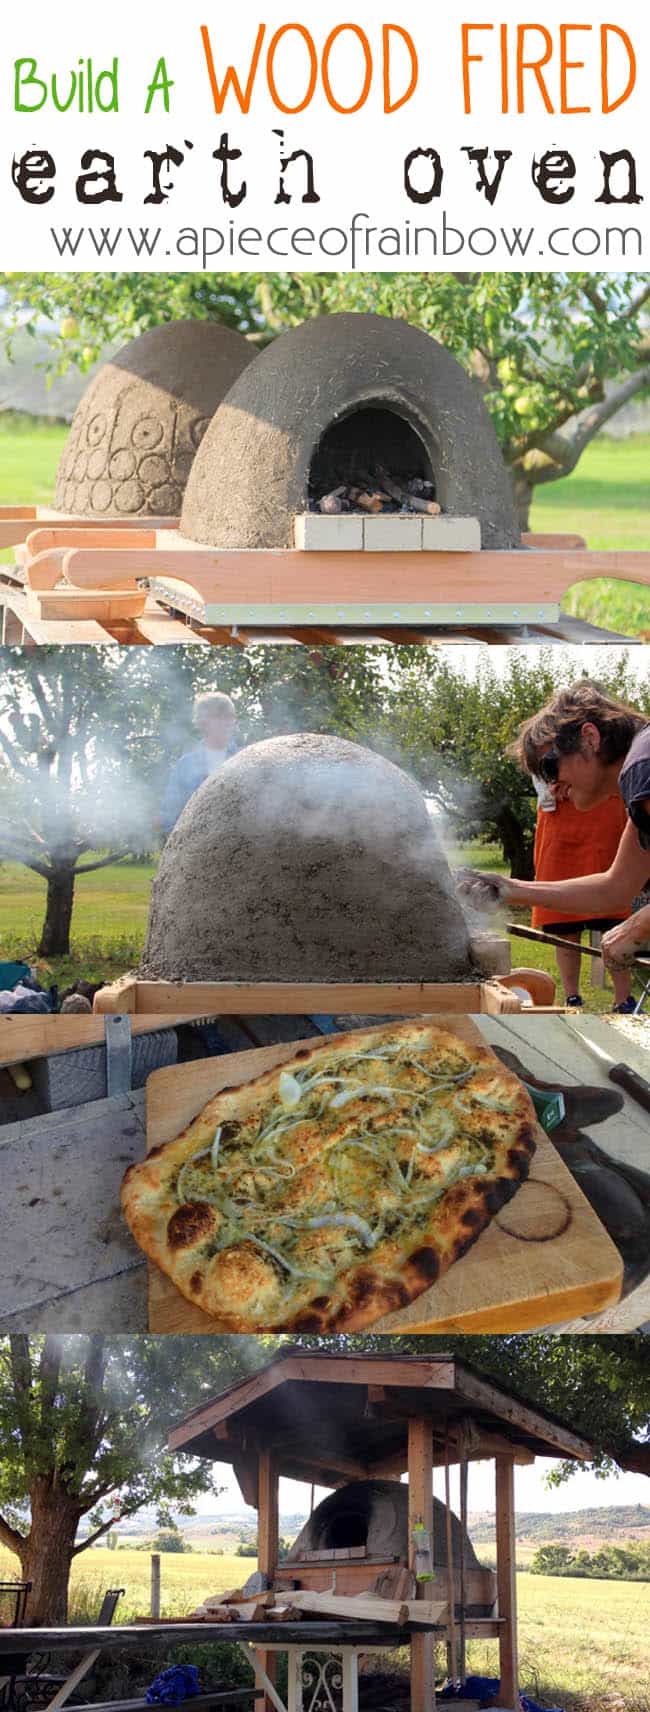 Build a wood fired earth oven with readily available materials, and make pizzas, breads, cookies! | a piece of rainbow blog